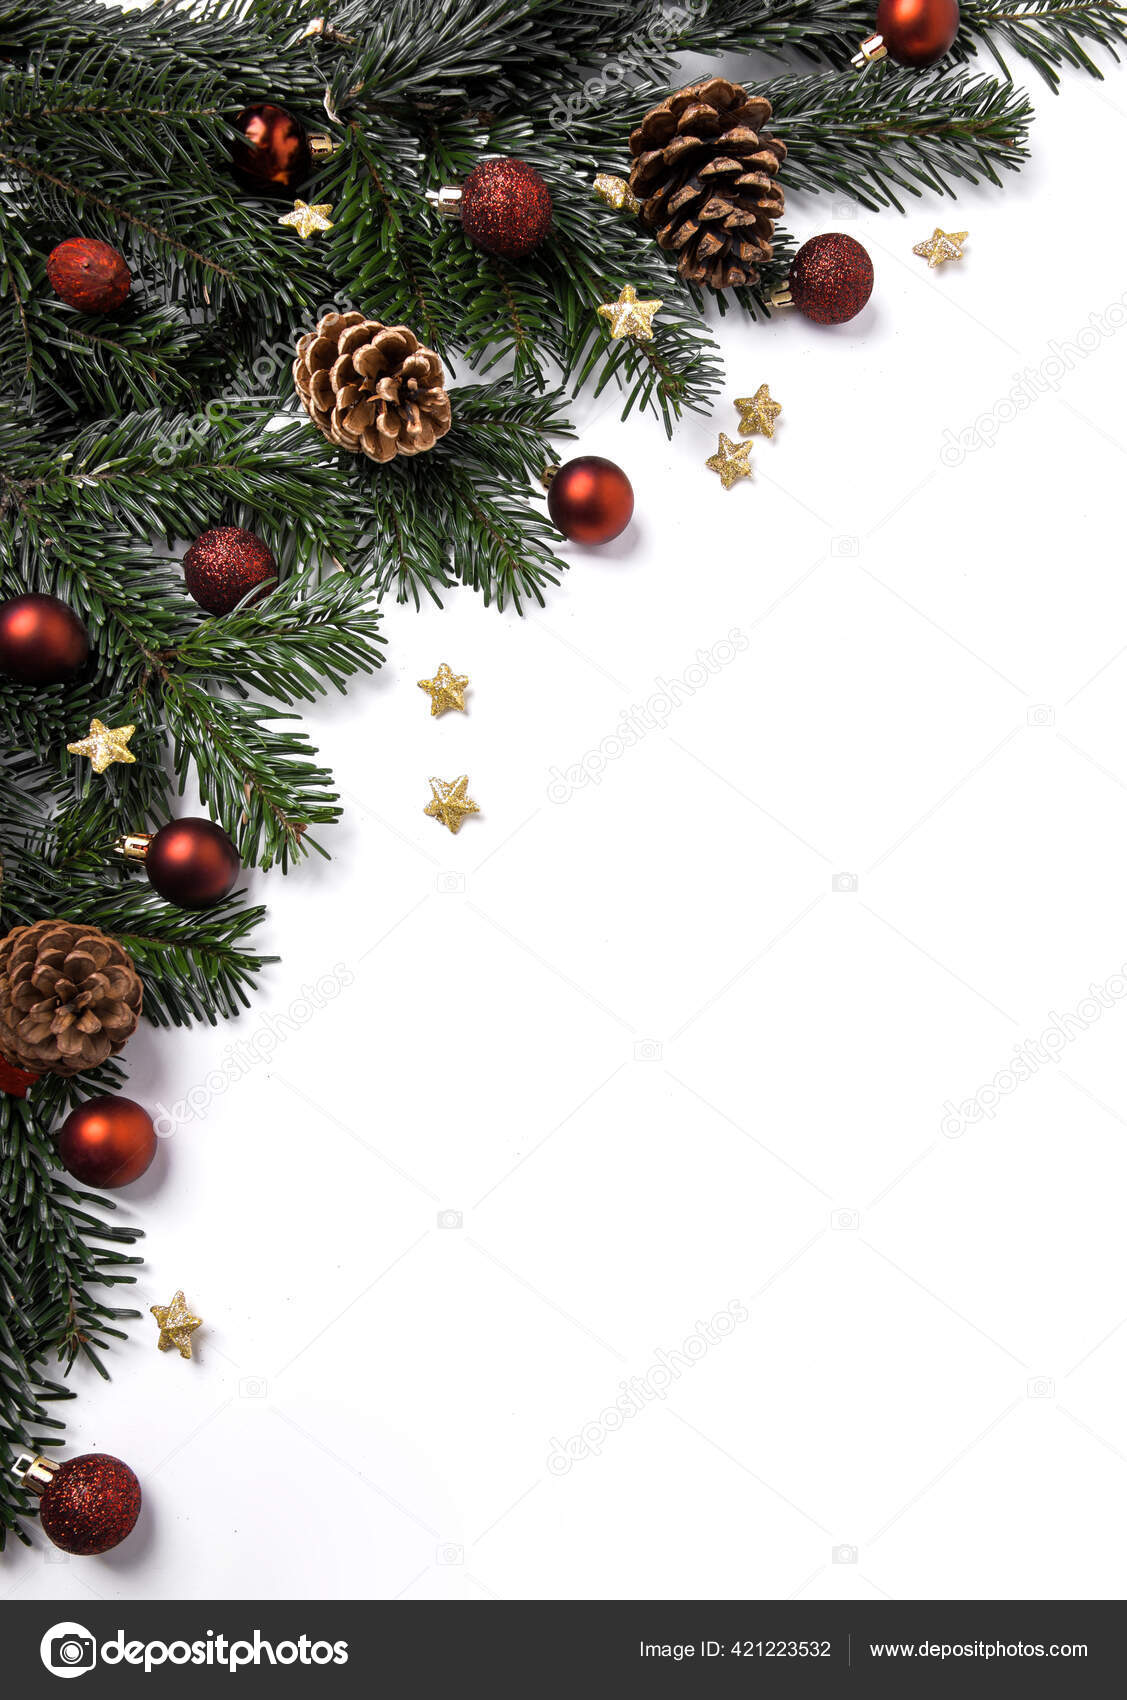 Pine branches, Stock image